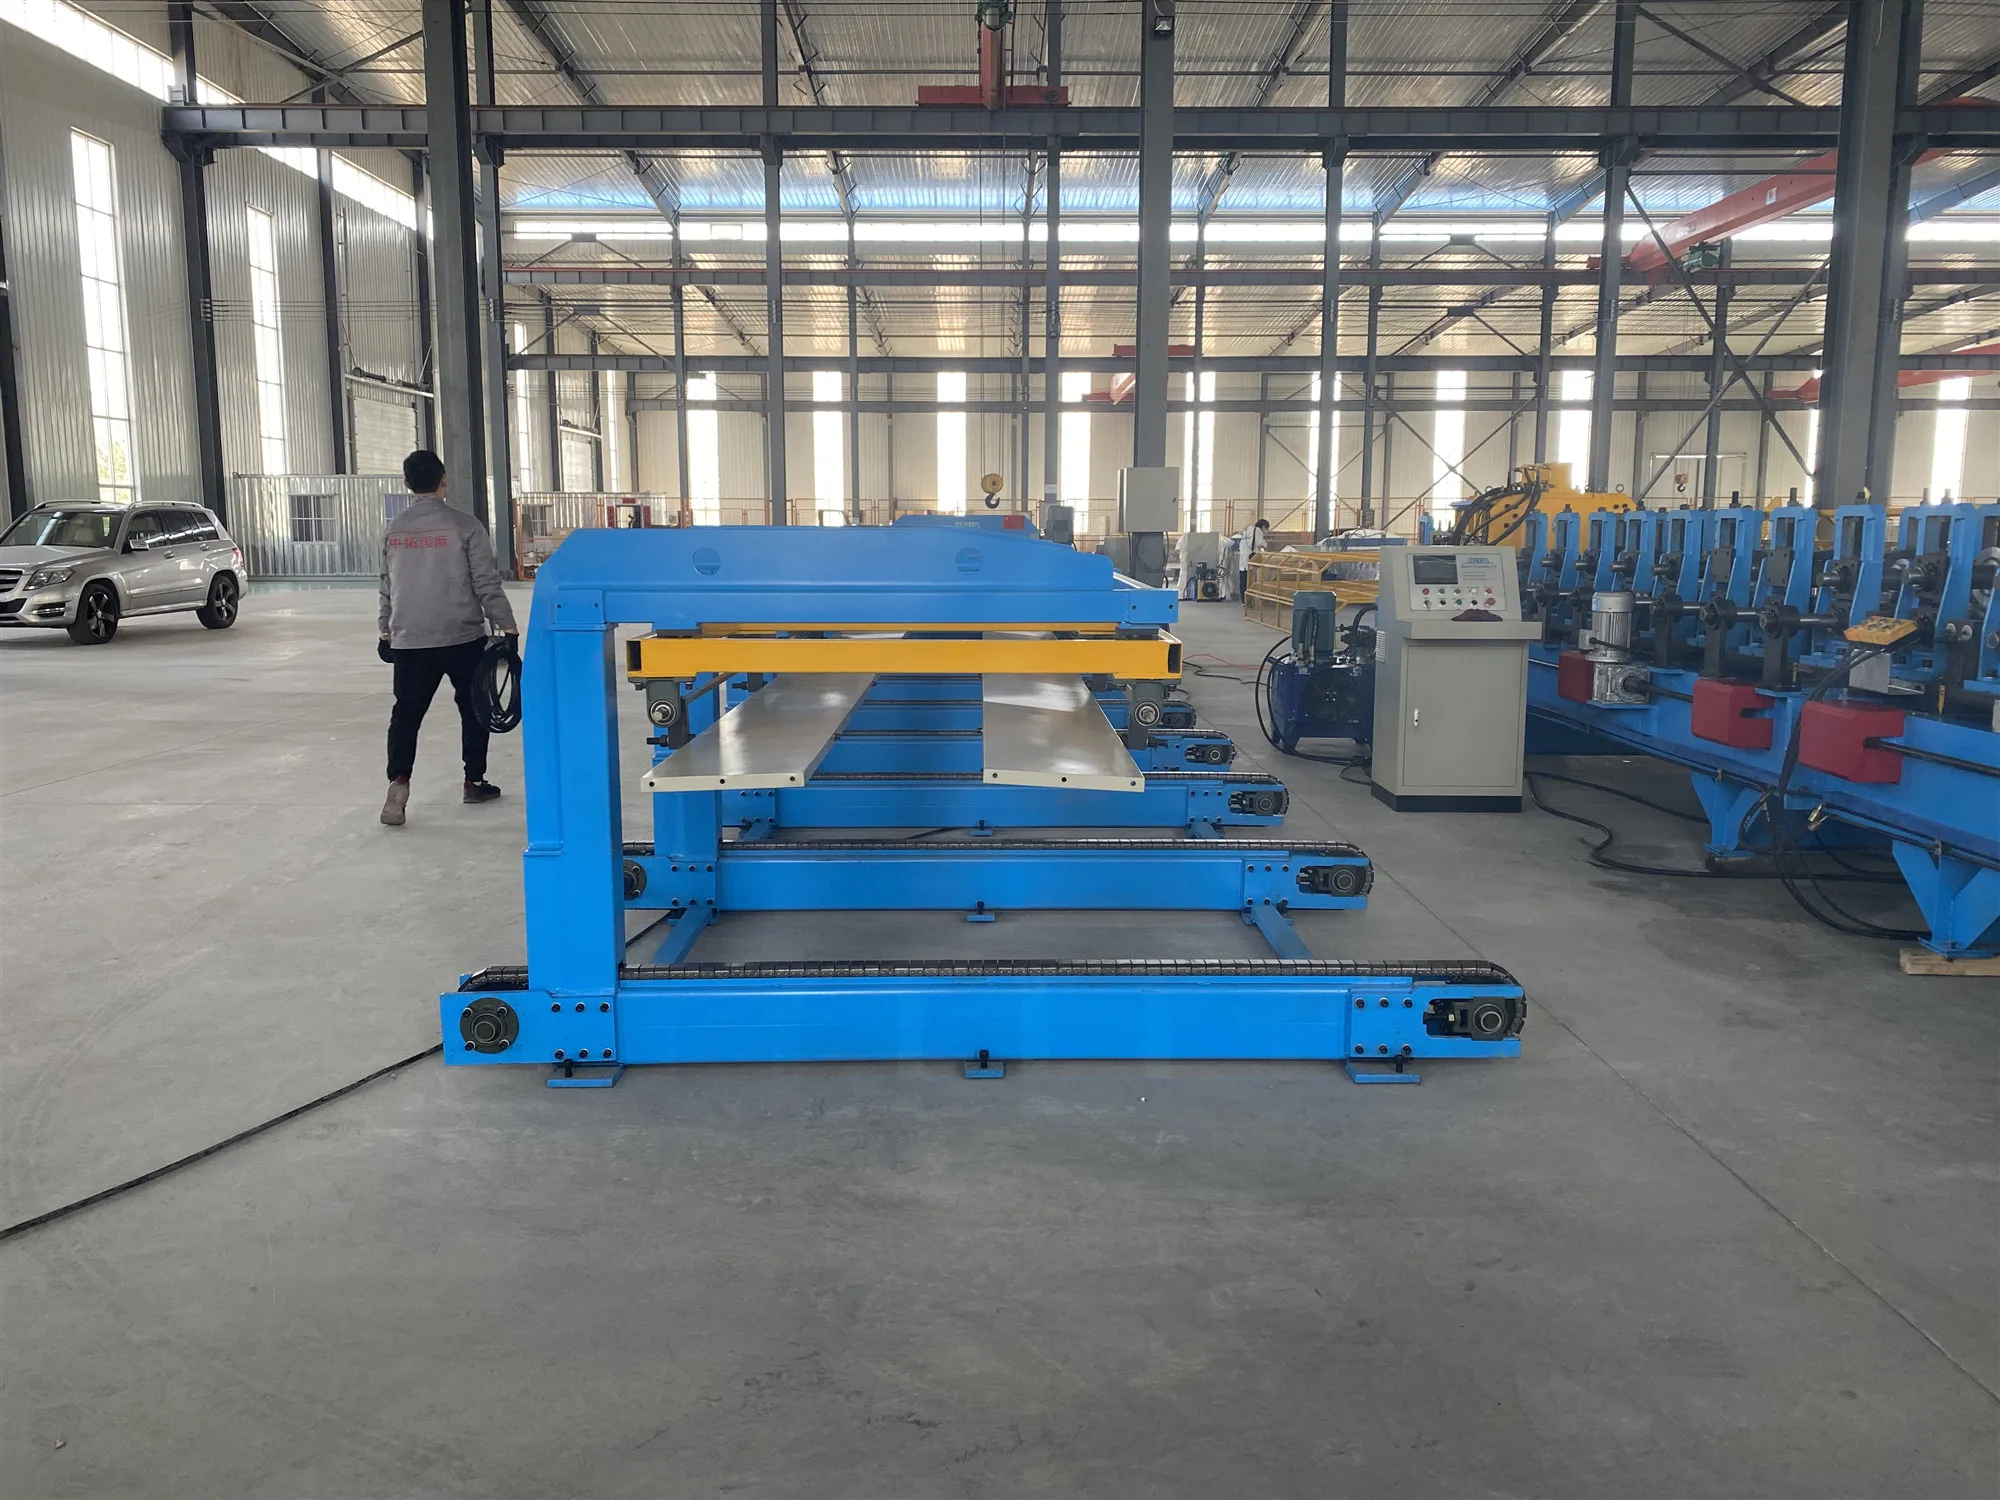 Auto stacker for steel roof panel roofing making machine